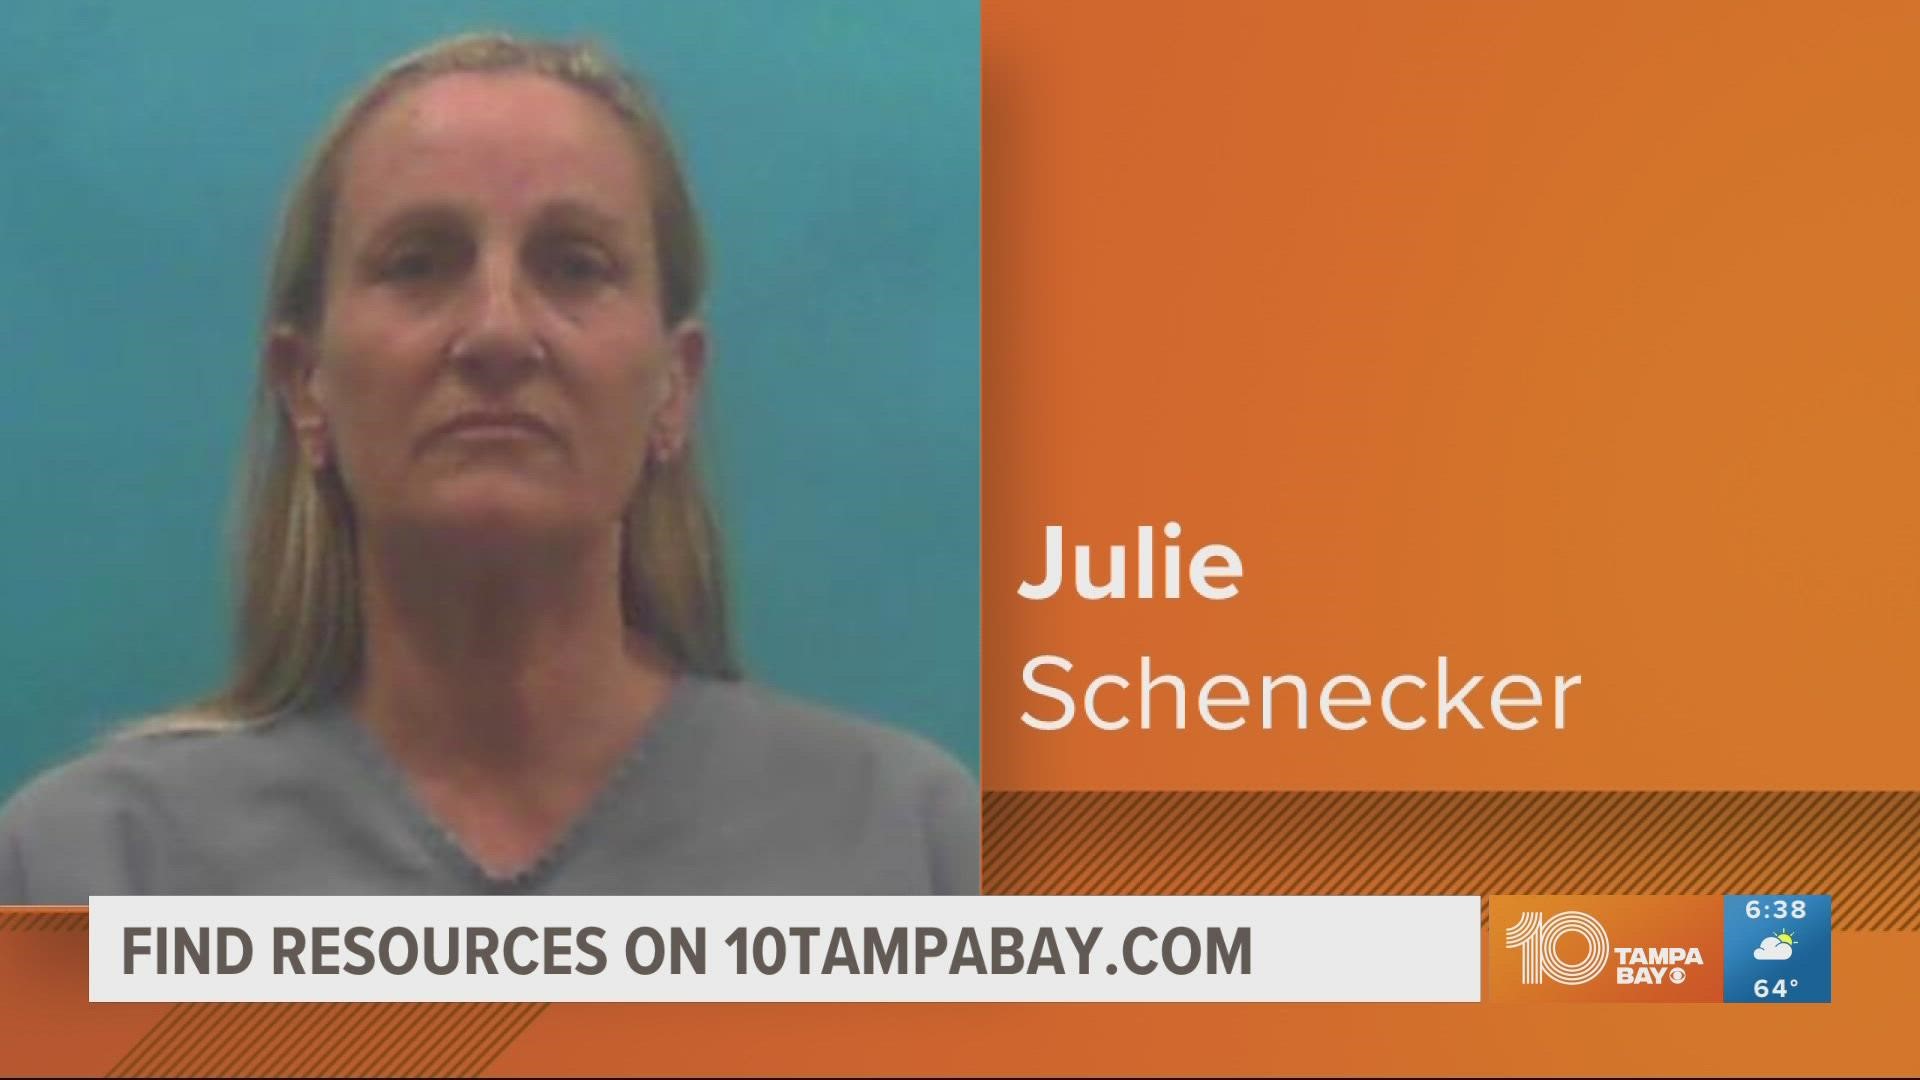 Julie Schenecker was sentenced to two life terms to be served at the same time.